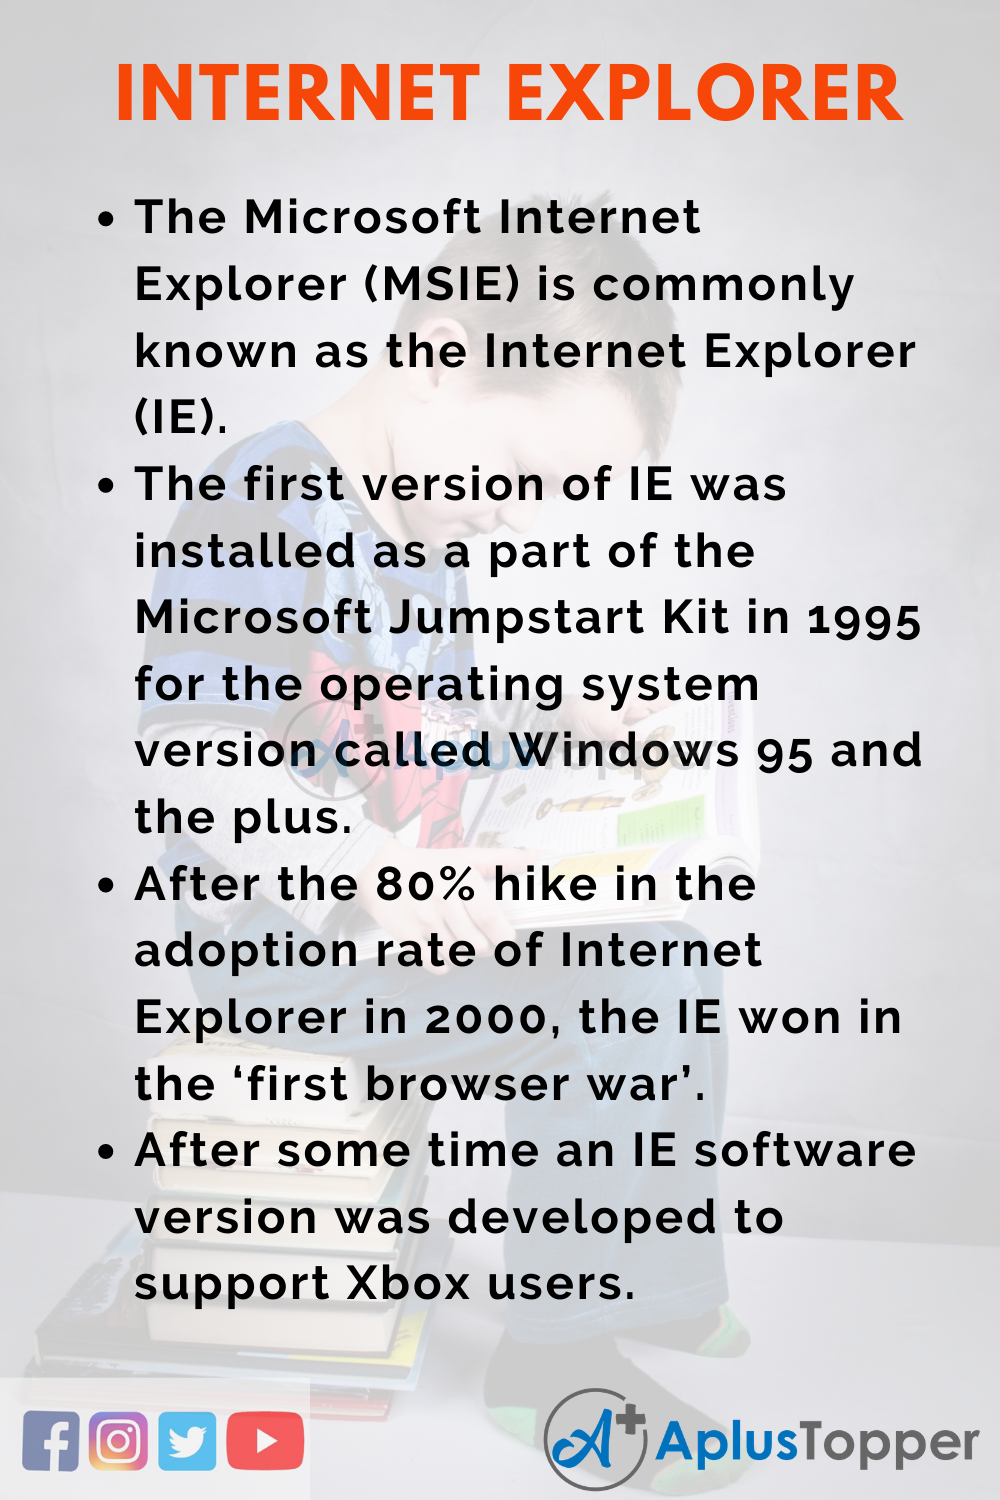 10 Lines On Internet Explorer for Higher Class Students